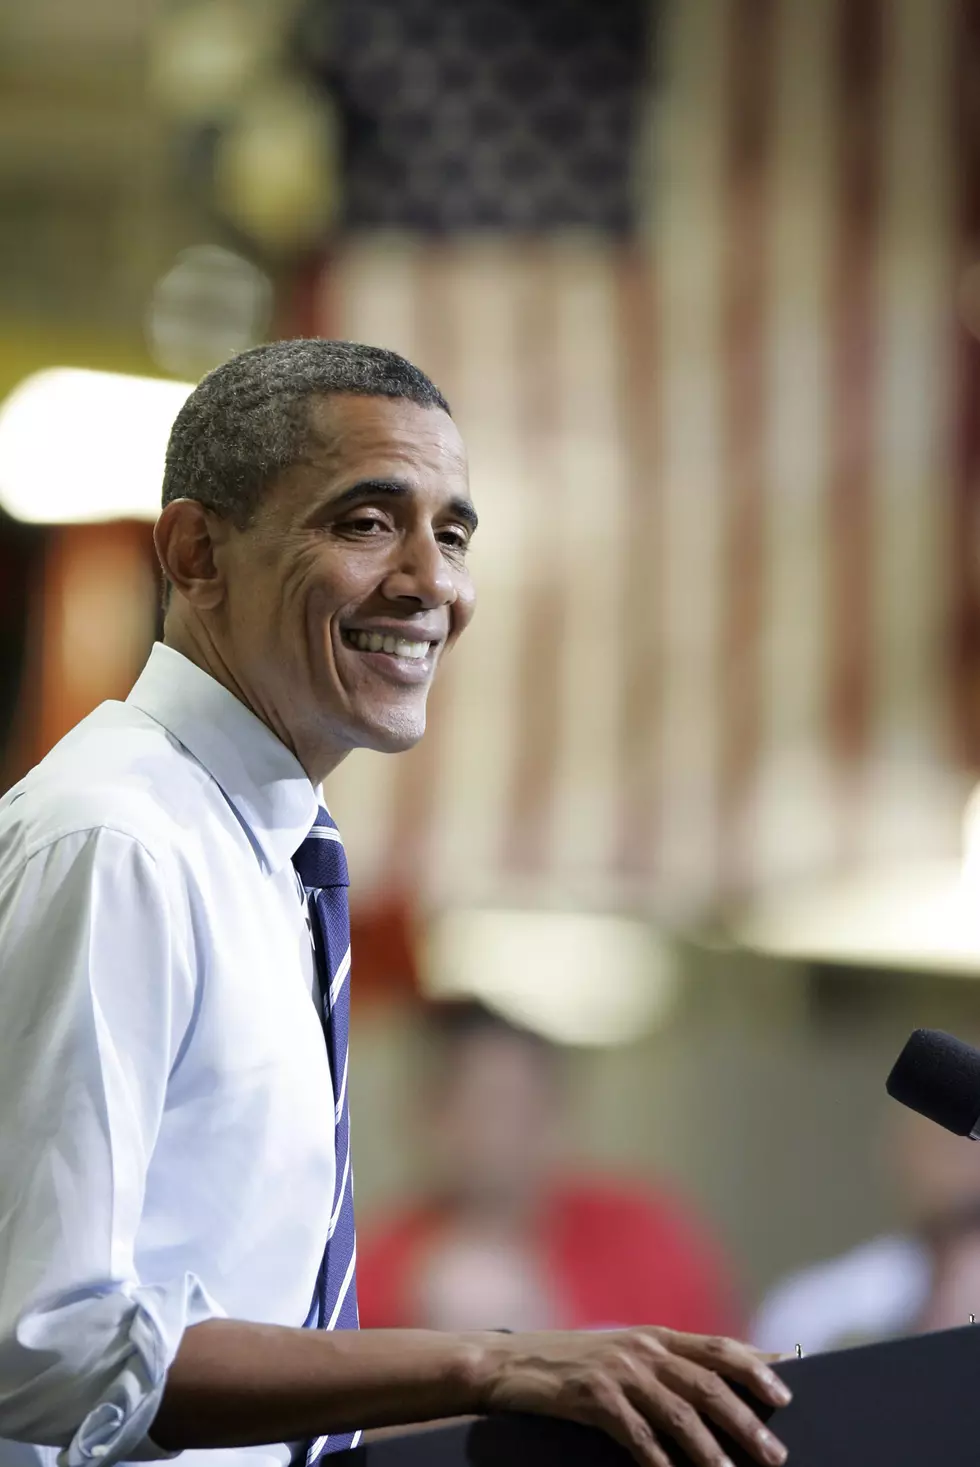 President Obama Eats Chili Dogs, NATO Land War in Libya, and Much More in Chad’s Steaming Pile